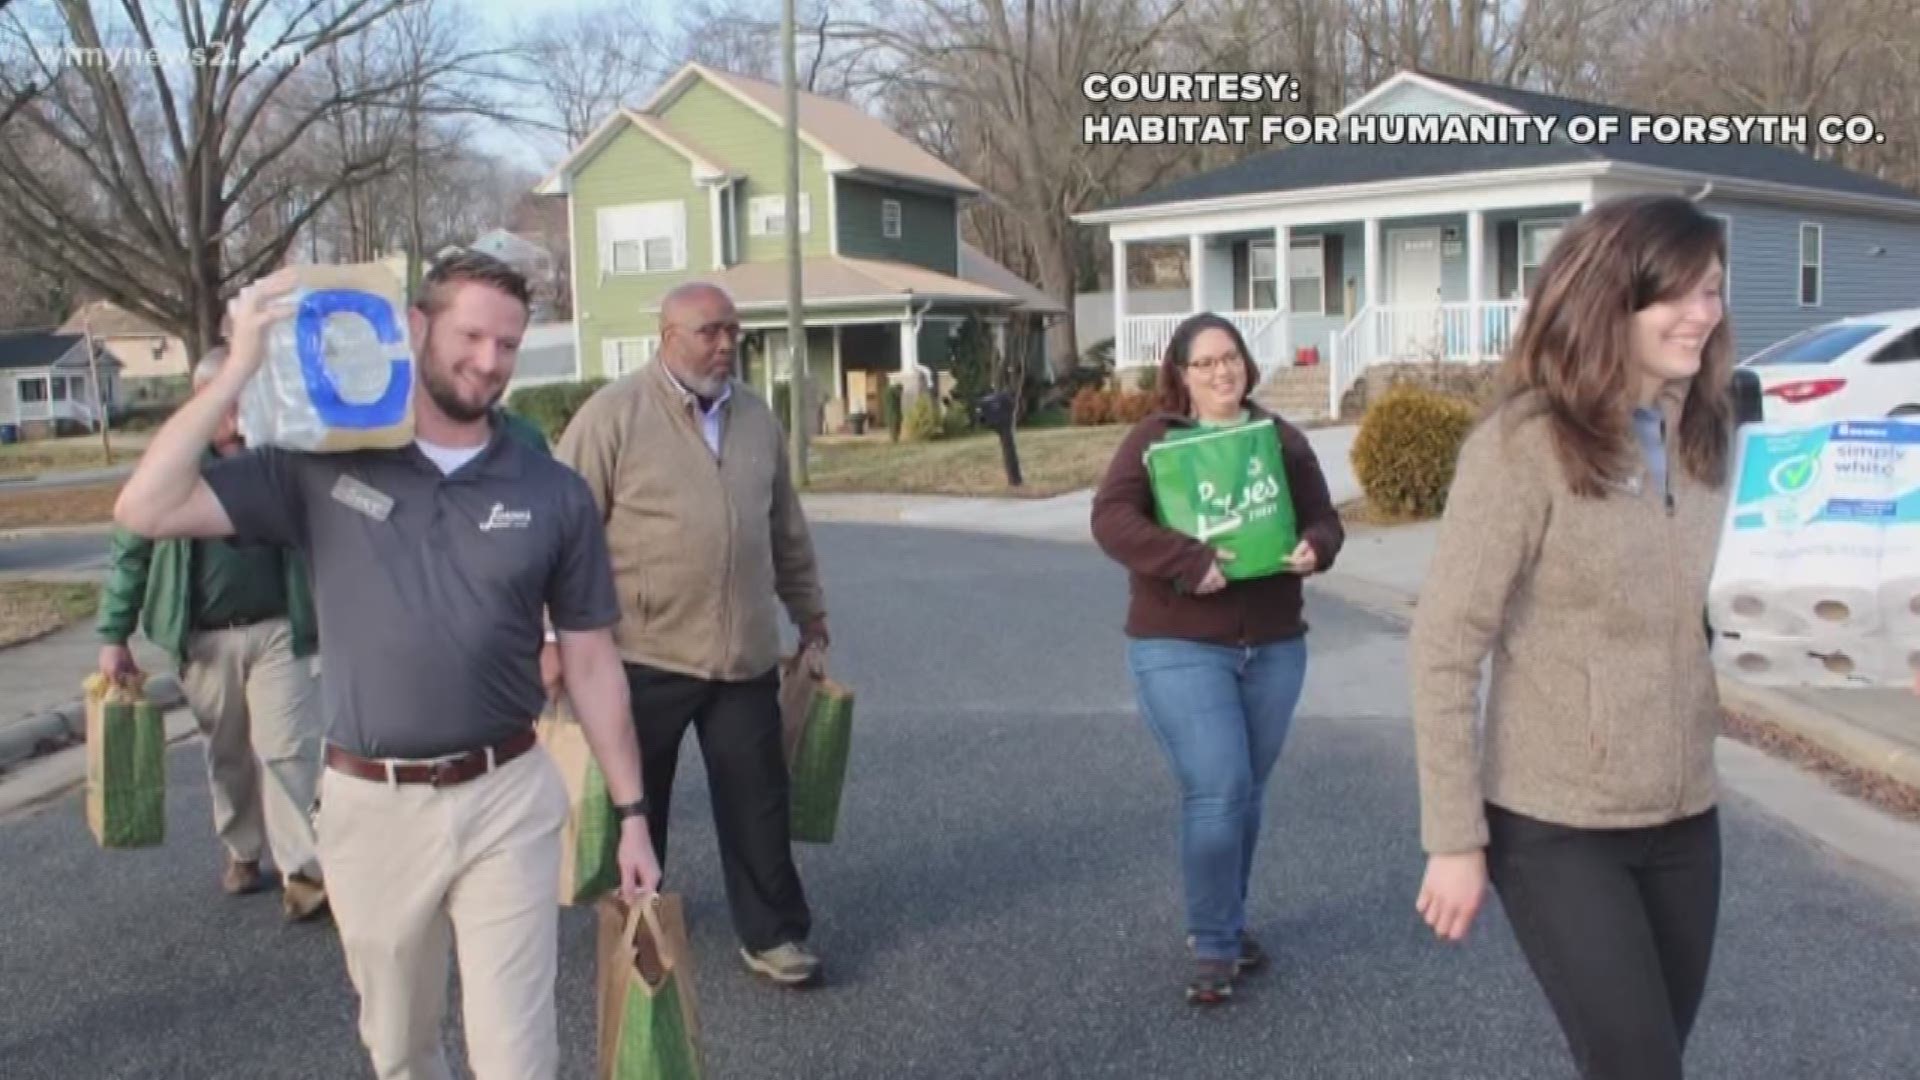 Lowes partnered up with Habitat for Humanity in Forsyth County to help feed two families in need